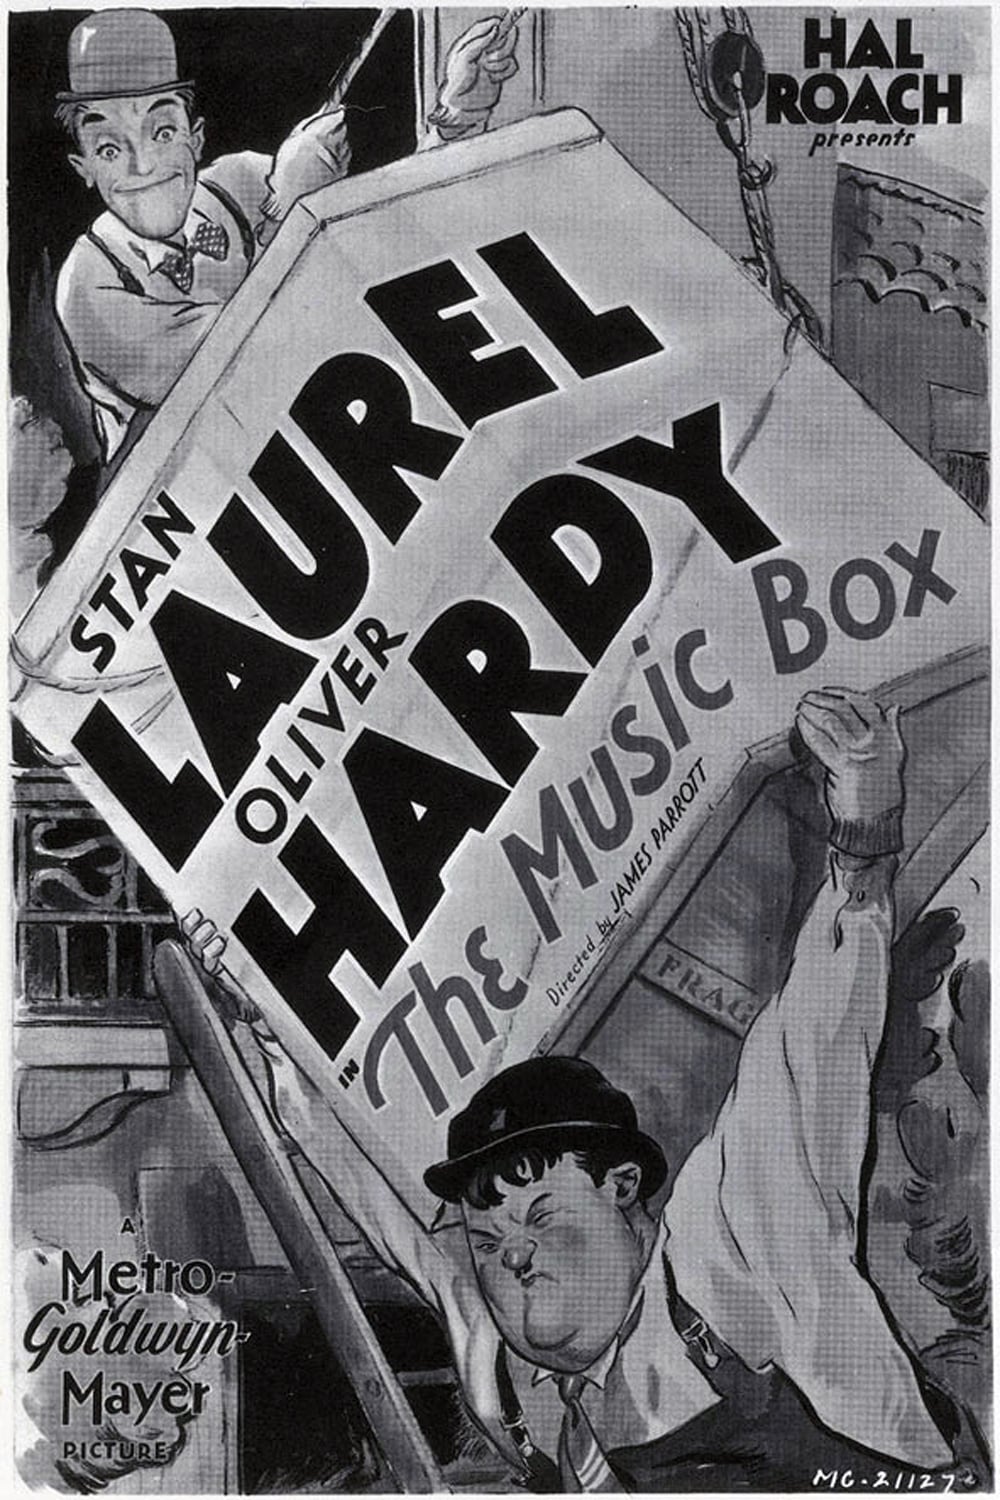 Poster for the movie "The Music Box"